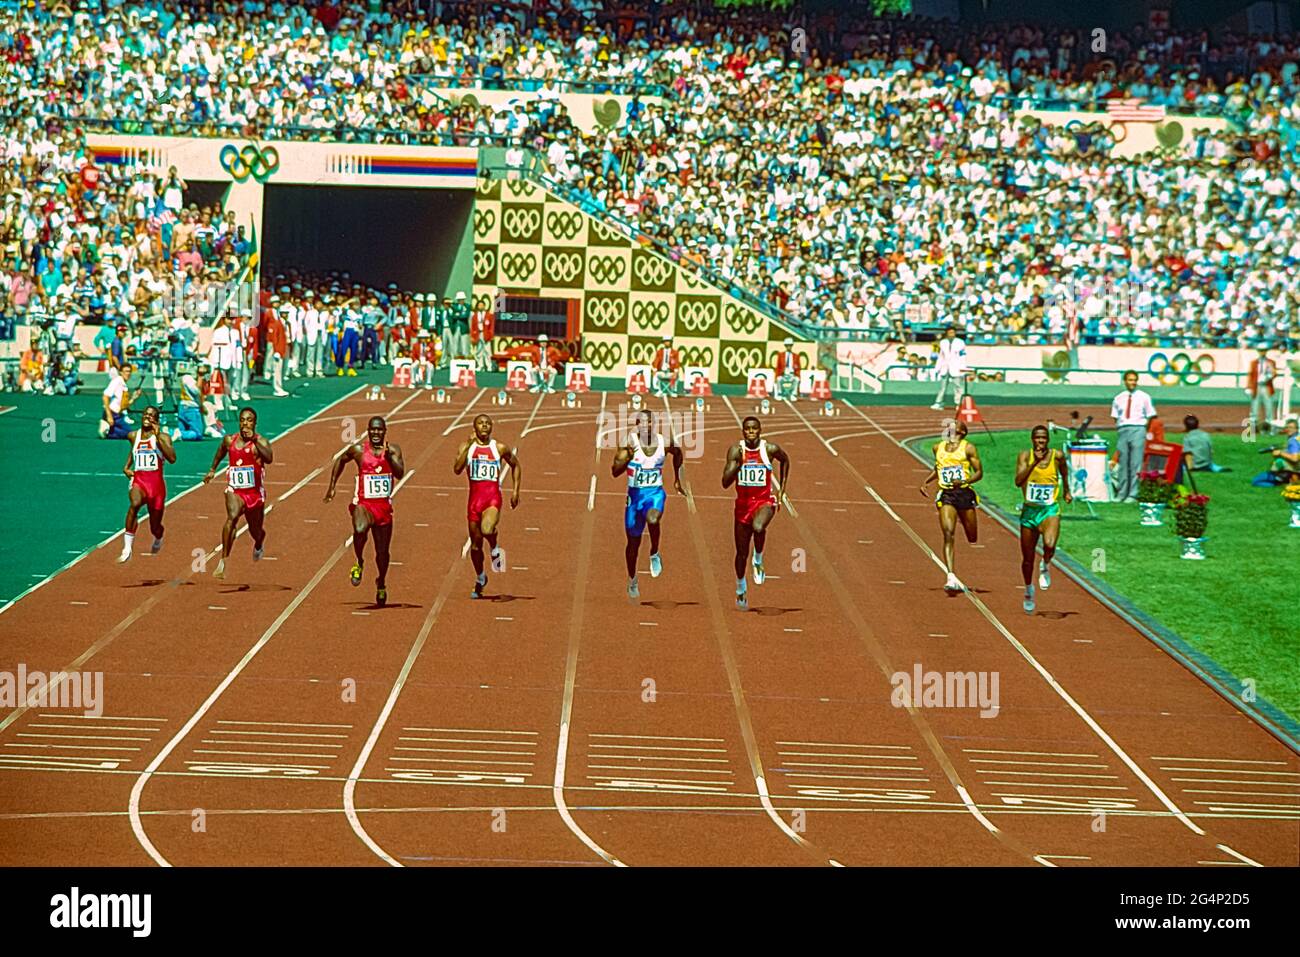 Final of the Men's 100m at the 1988 Olympic Summer Games. Ben Johnson (CAN) #159 wins but is later disqualified giving the victory to Carl Lewis (USA) #1102. Stock Photo